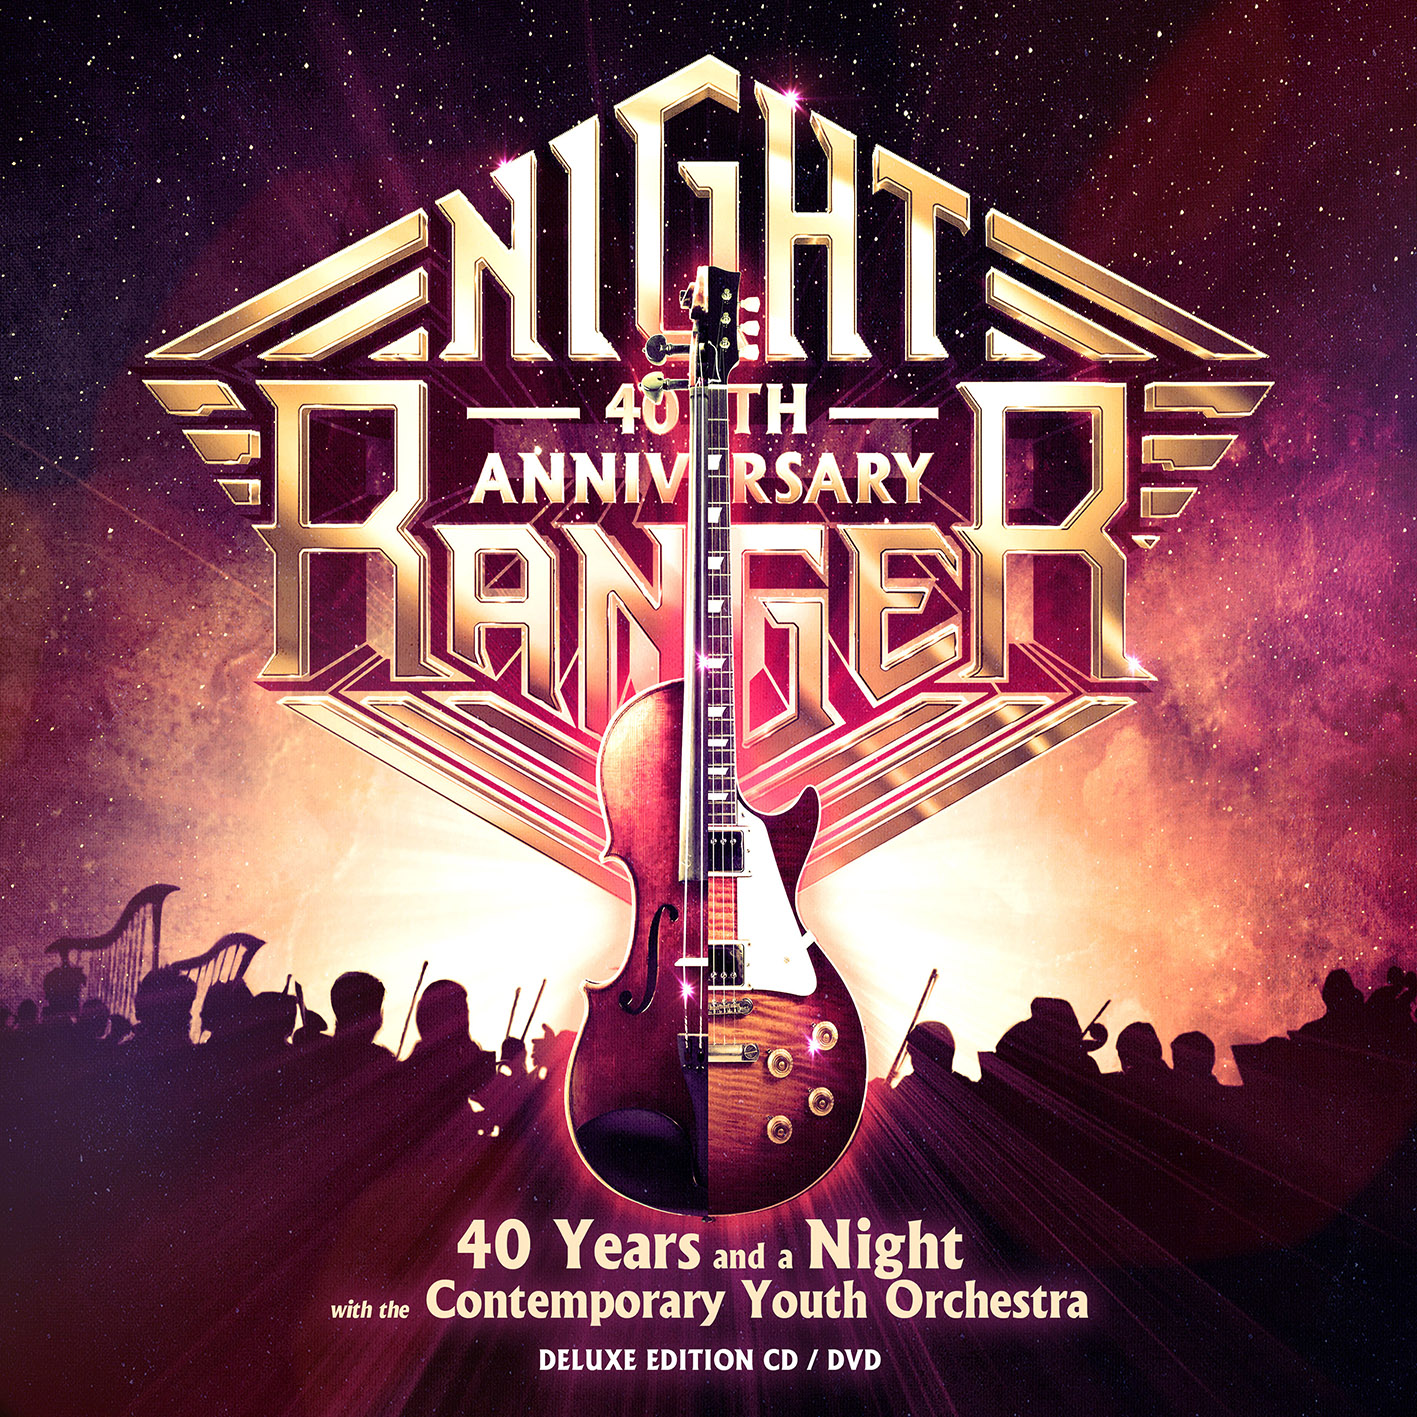 NIGHT RANGER - 40 Years and a Night With Contemporary Youth Orchestra